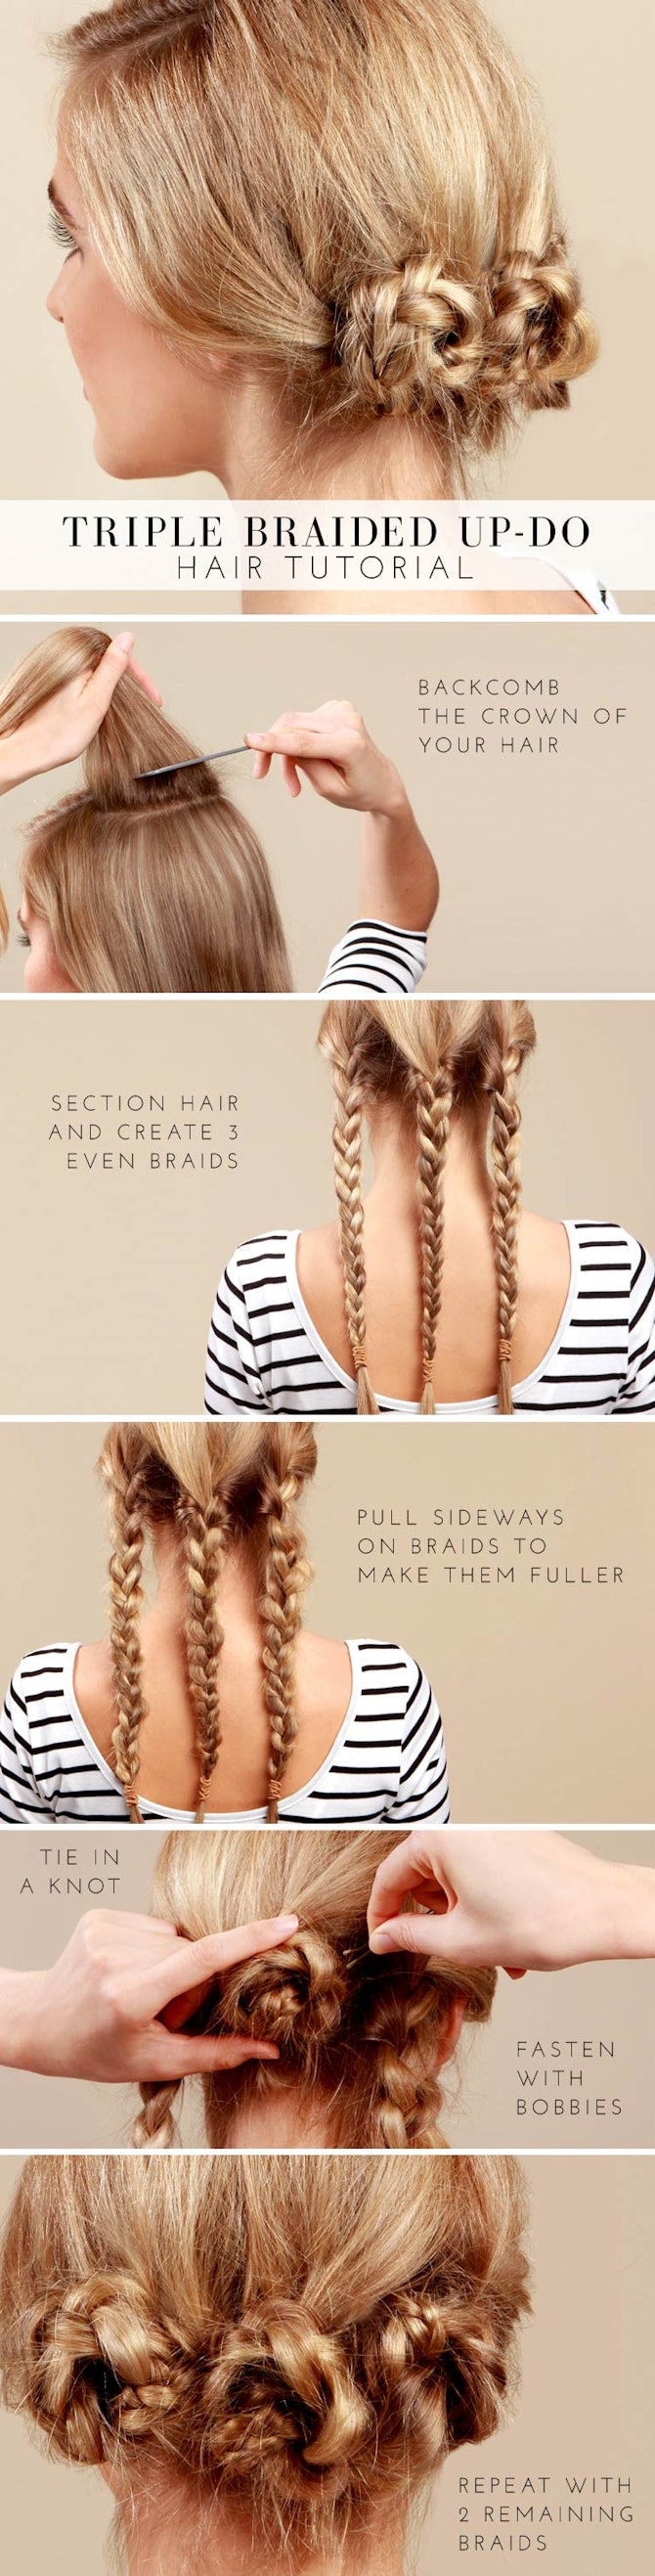 8 Cool Braid Tutorials From Pinterest That Will Actually Teach You How To Plait